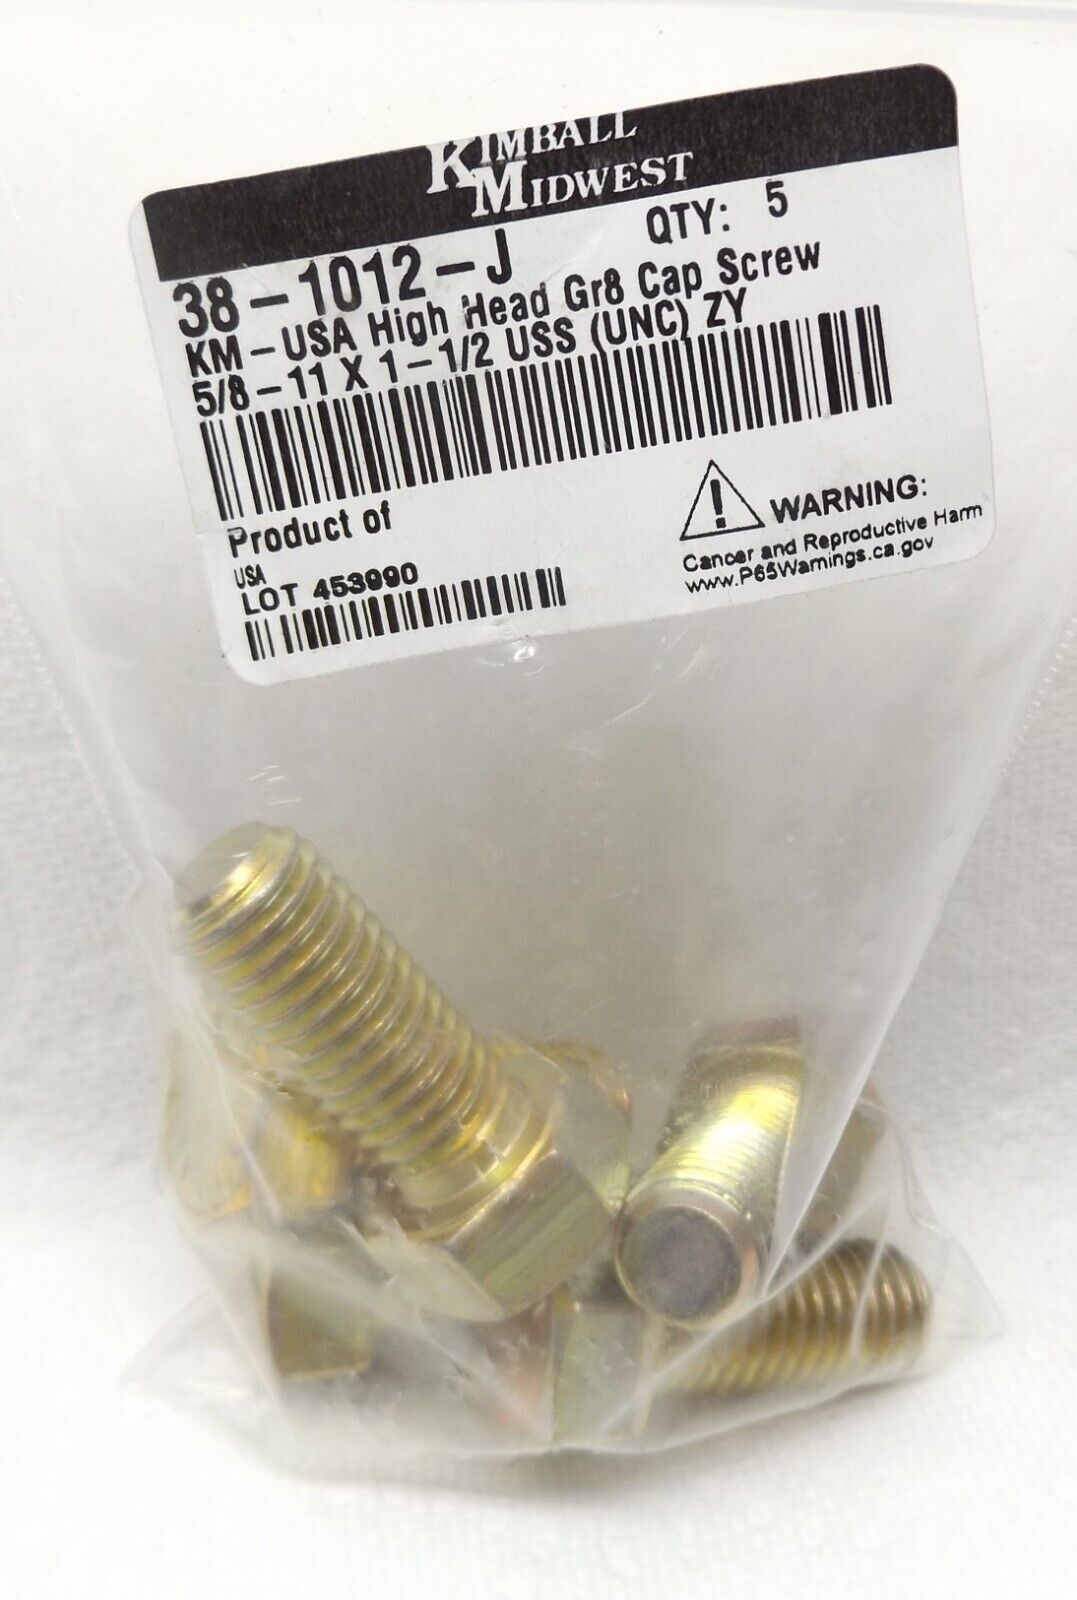 BAG OF 5 KIMBALL MIDWEST 381012  5/8-11X1-1/2" USA HIGH HEAD GR8 CAP SCREW ZY